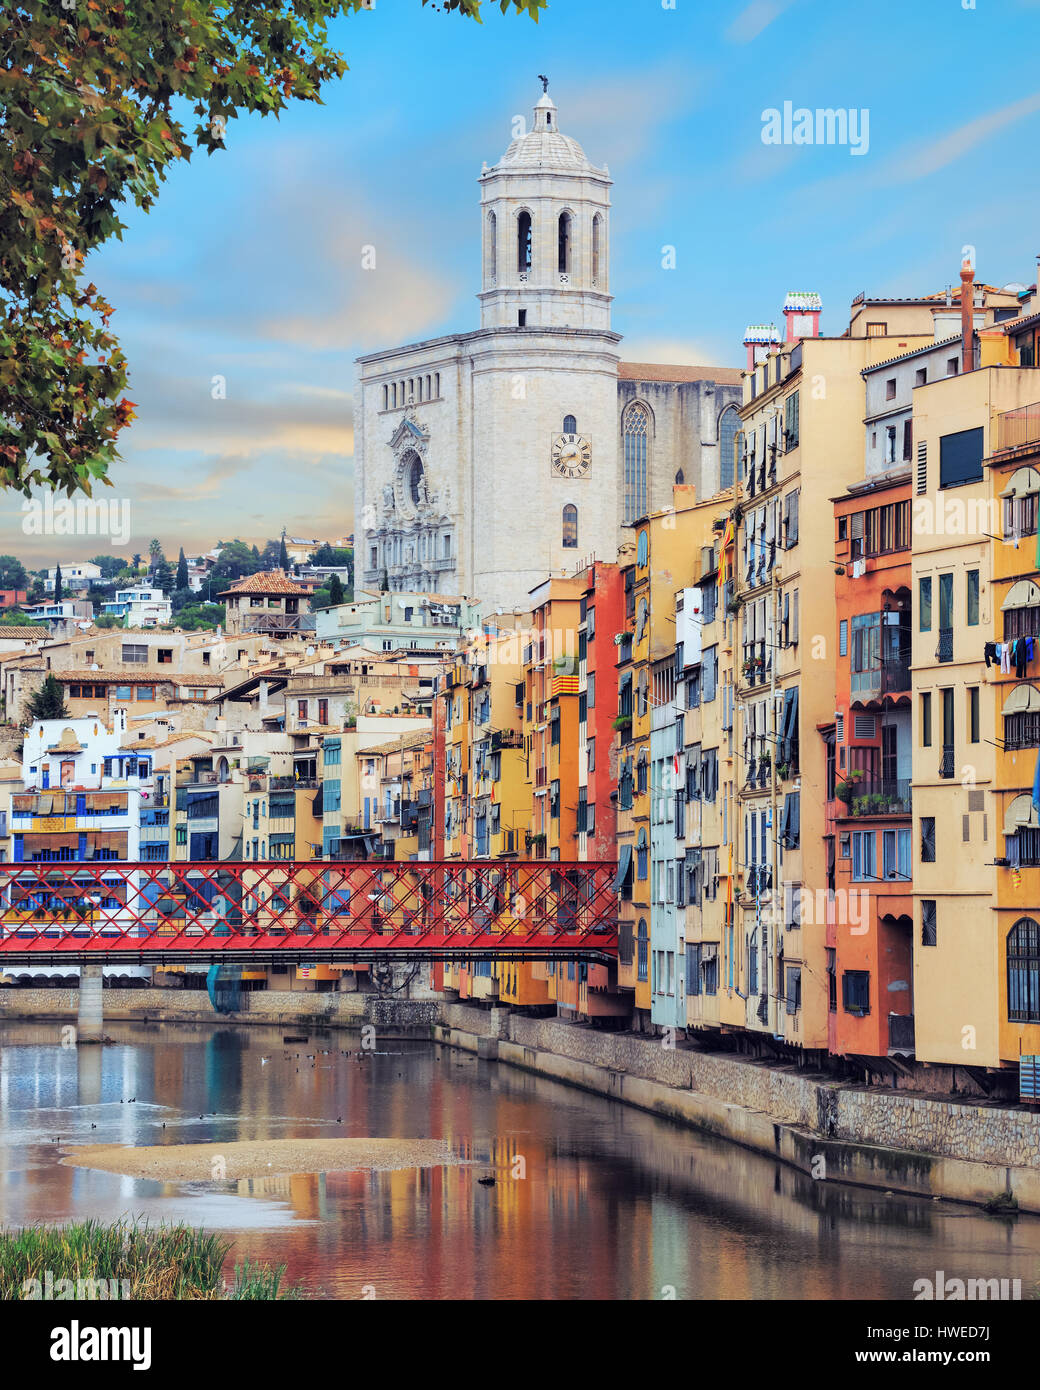 Old Girona town, view on river Onyar Stock Photo